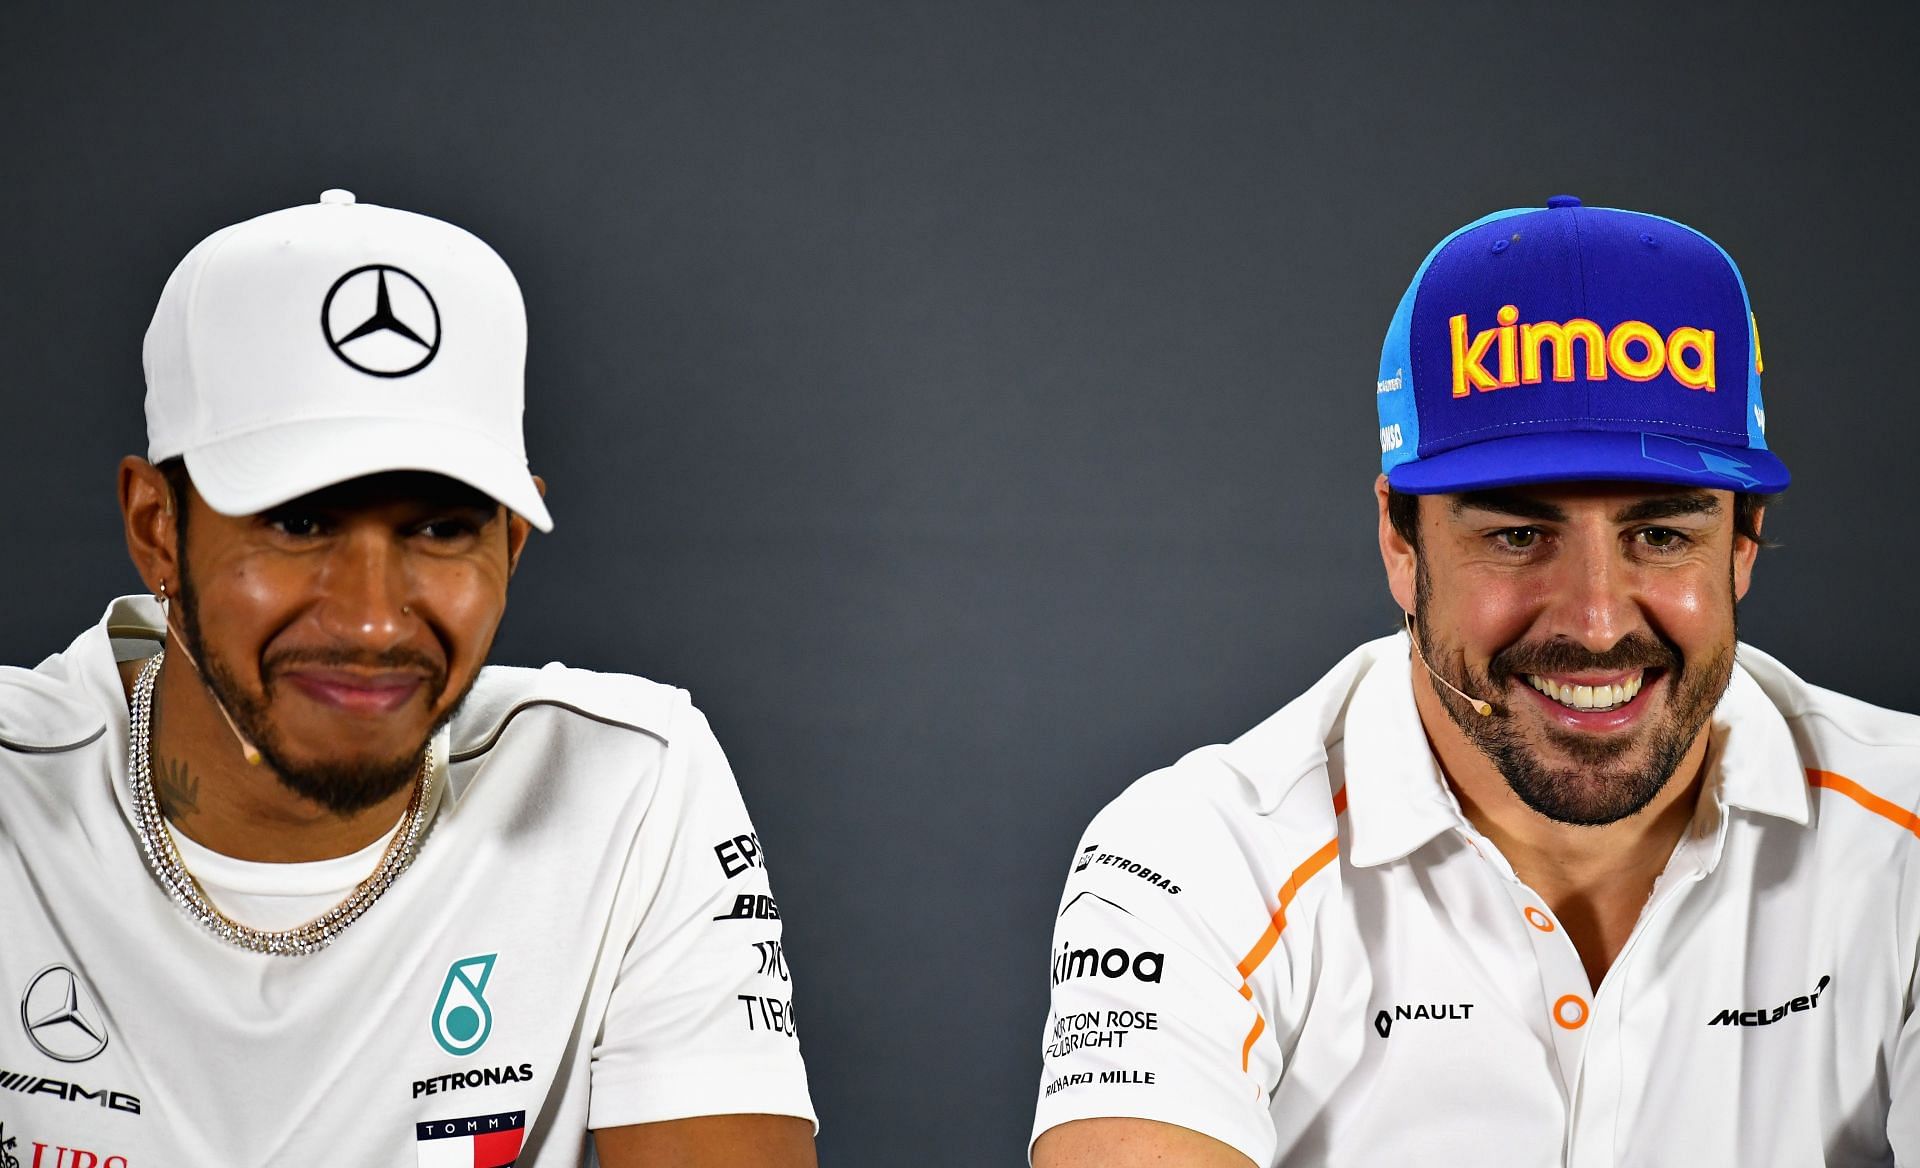 Lewis Hamilton and Fernando Alonso in the Drivers Press Conference ahead of the F1 2021 Brazil Grand Prix. (Photo by Clive Mason/Getty Images)